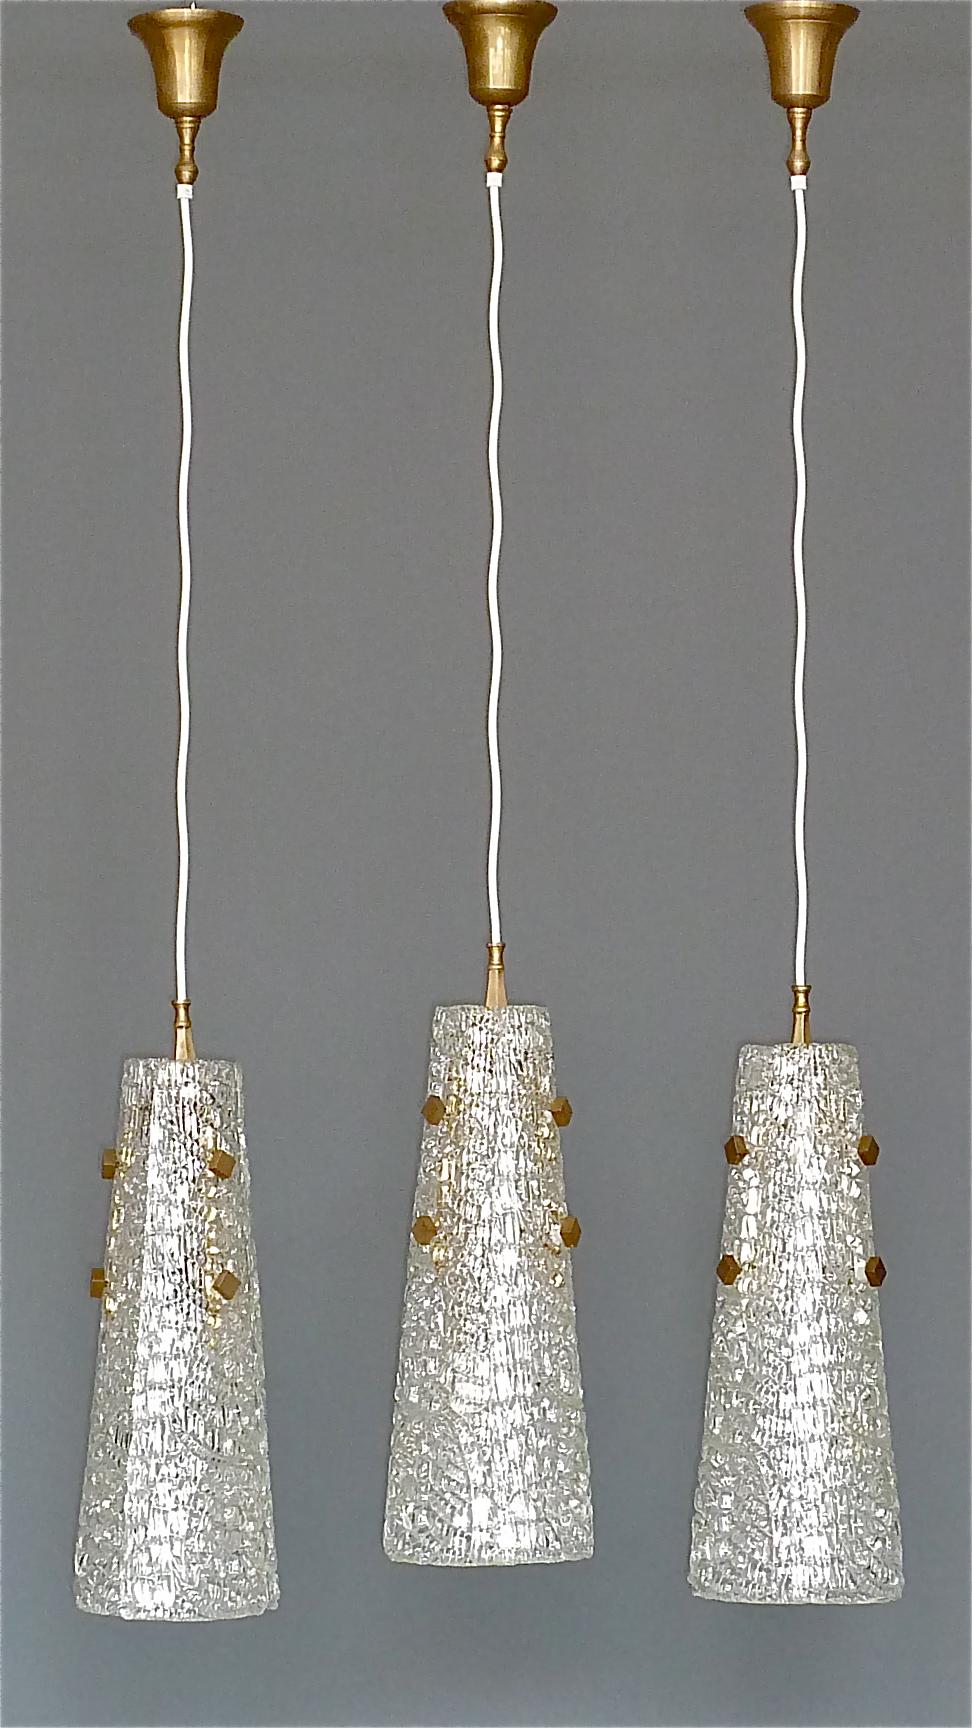 Mid-Century Modern Set of 3 Large Paolo Venini Lamps Textured Murano Ice Glass Brass 1950 Kalmar For Sale